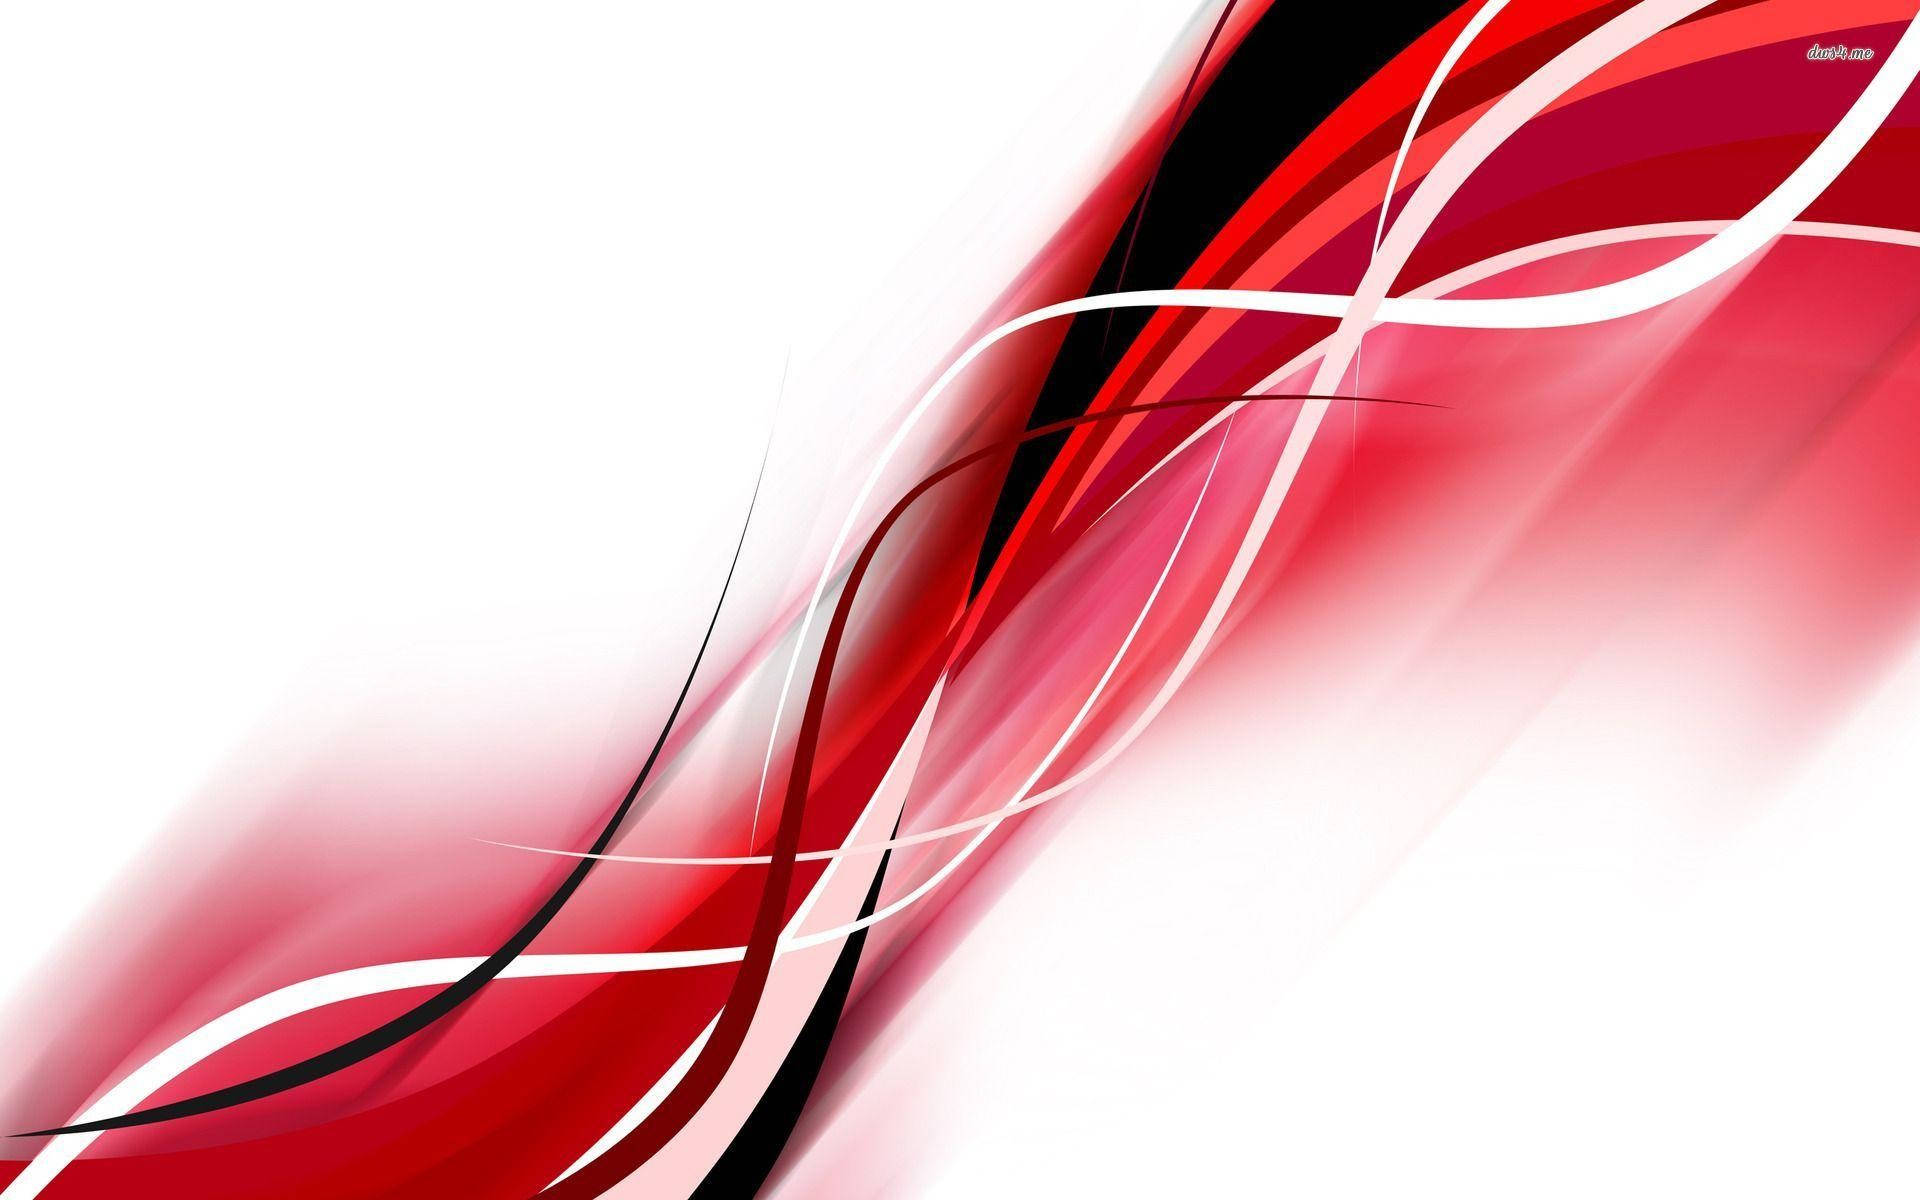 Swirling Red And White Helix Background